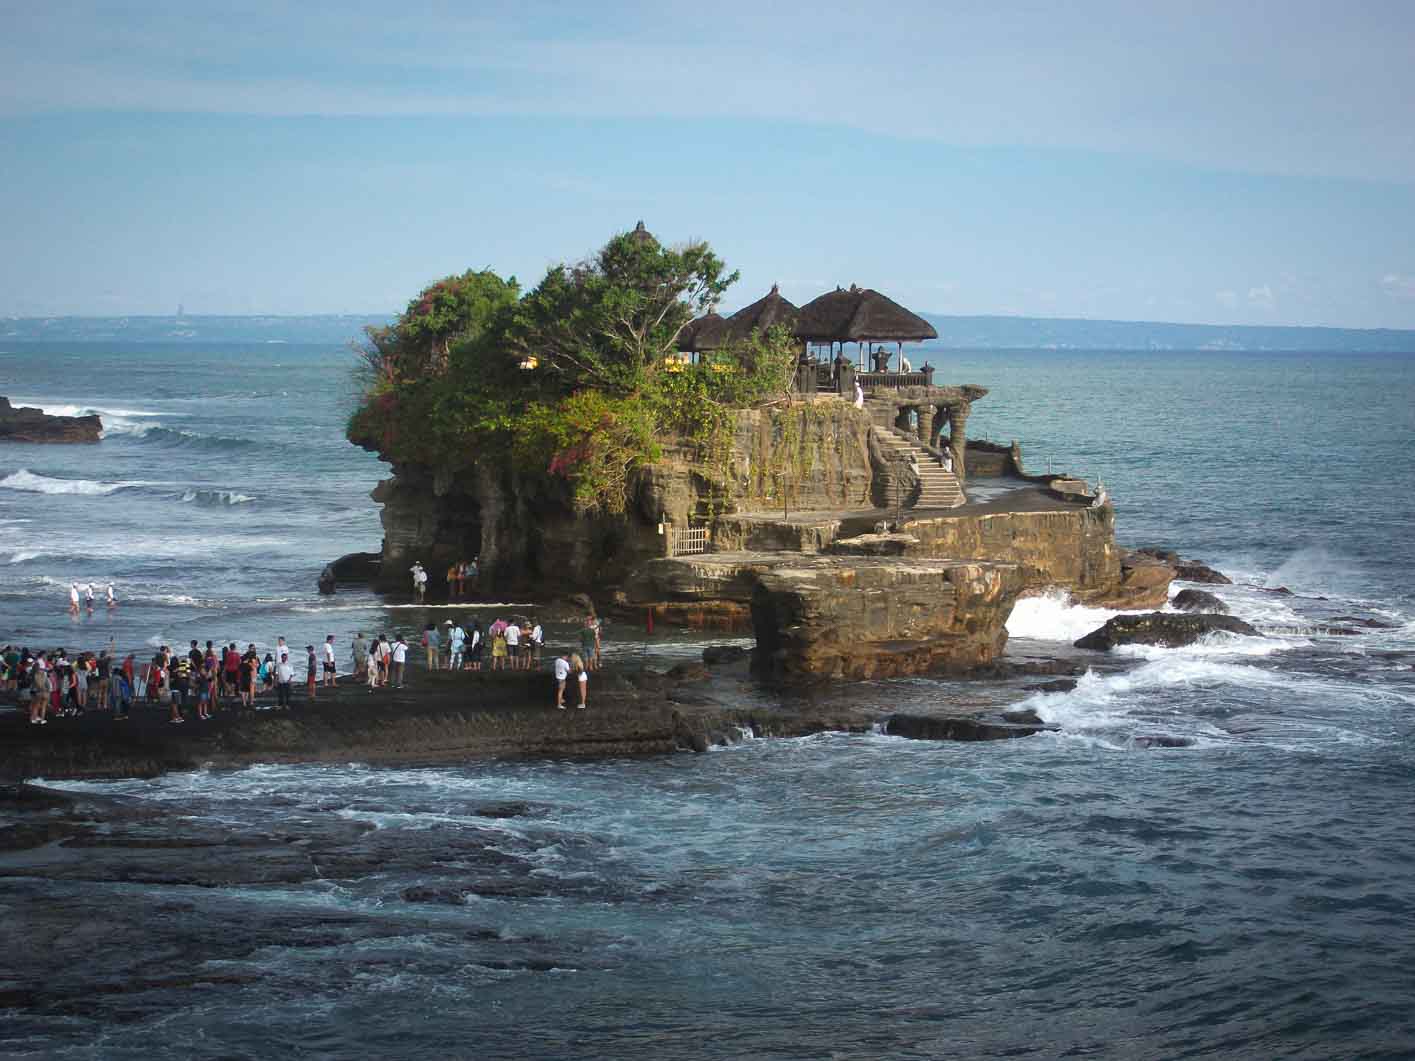 Tanah Lot is on an islet in bali to visit in 7 days